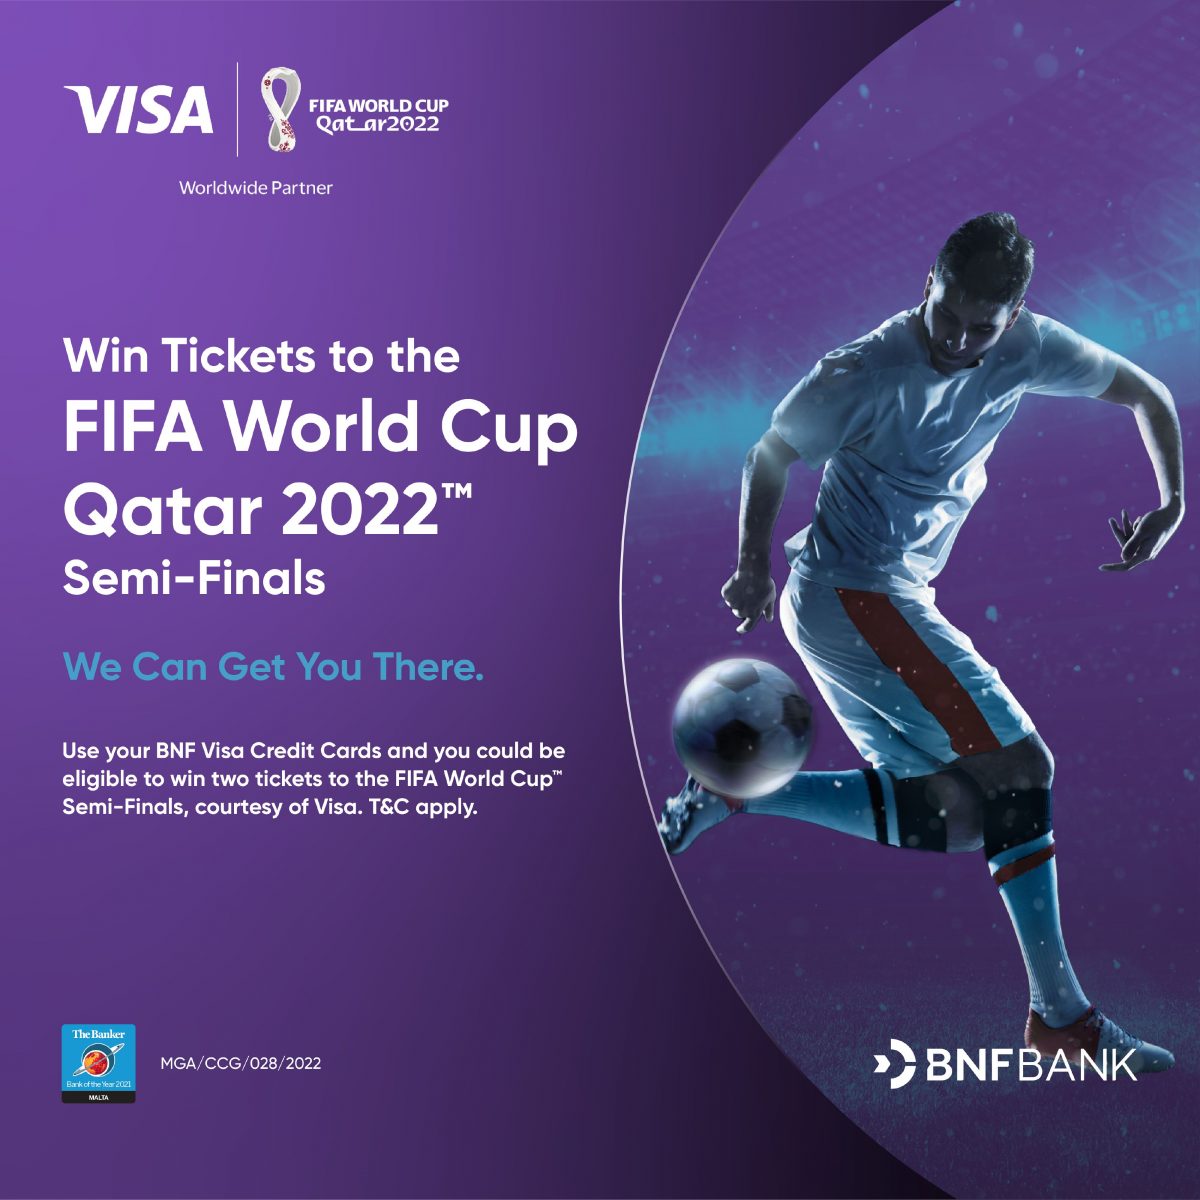 BNF Bank launches a Credit Card Campaign with chance to win once-in-a-lifetime World Cup experience